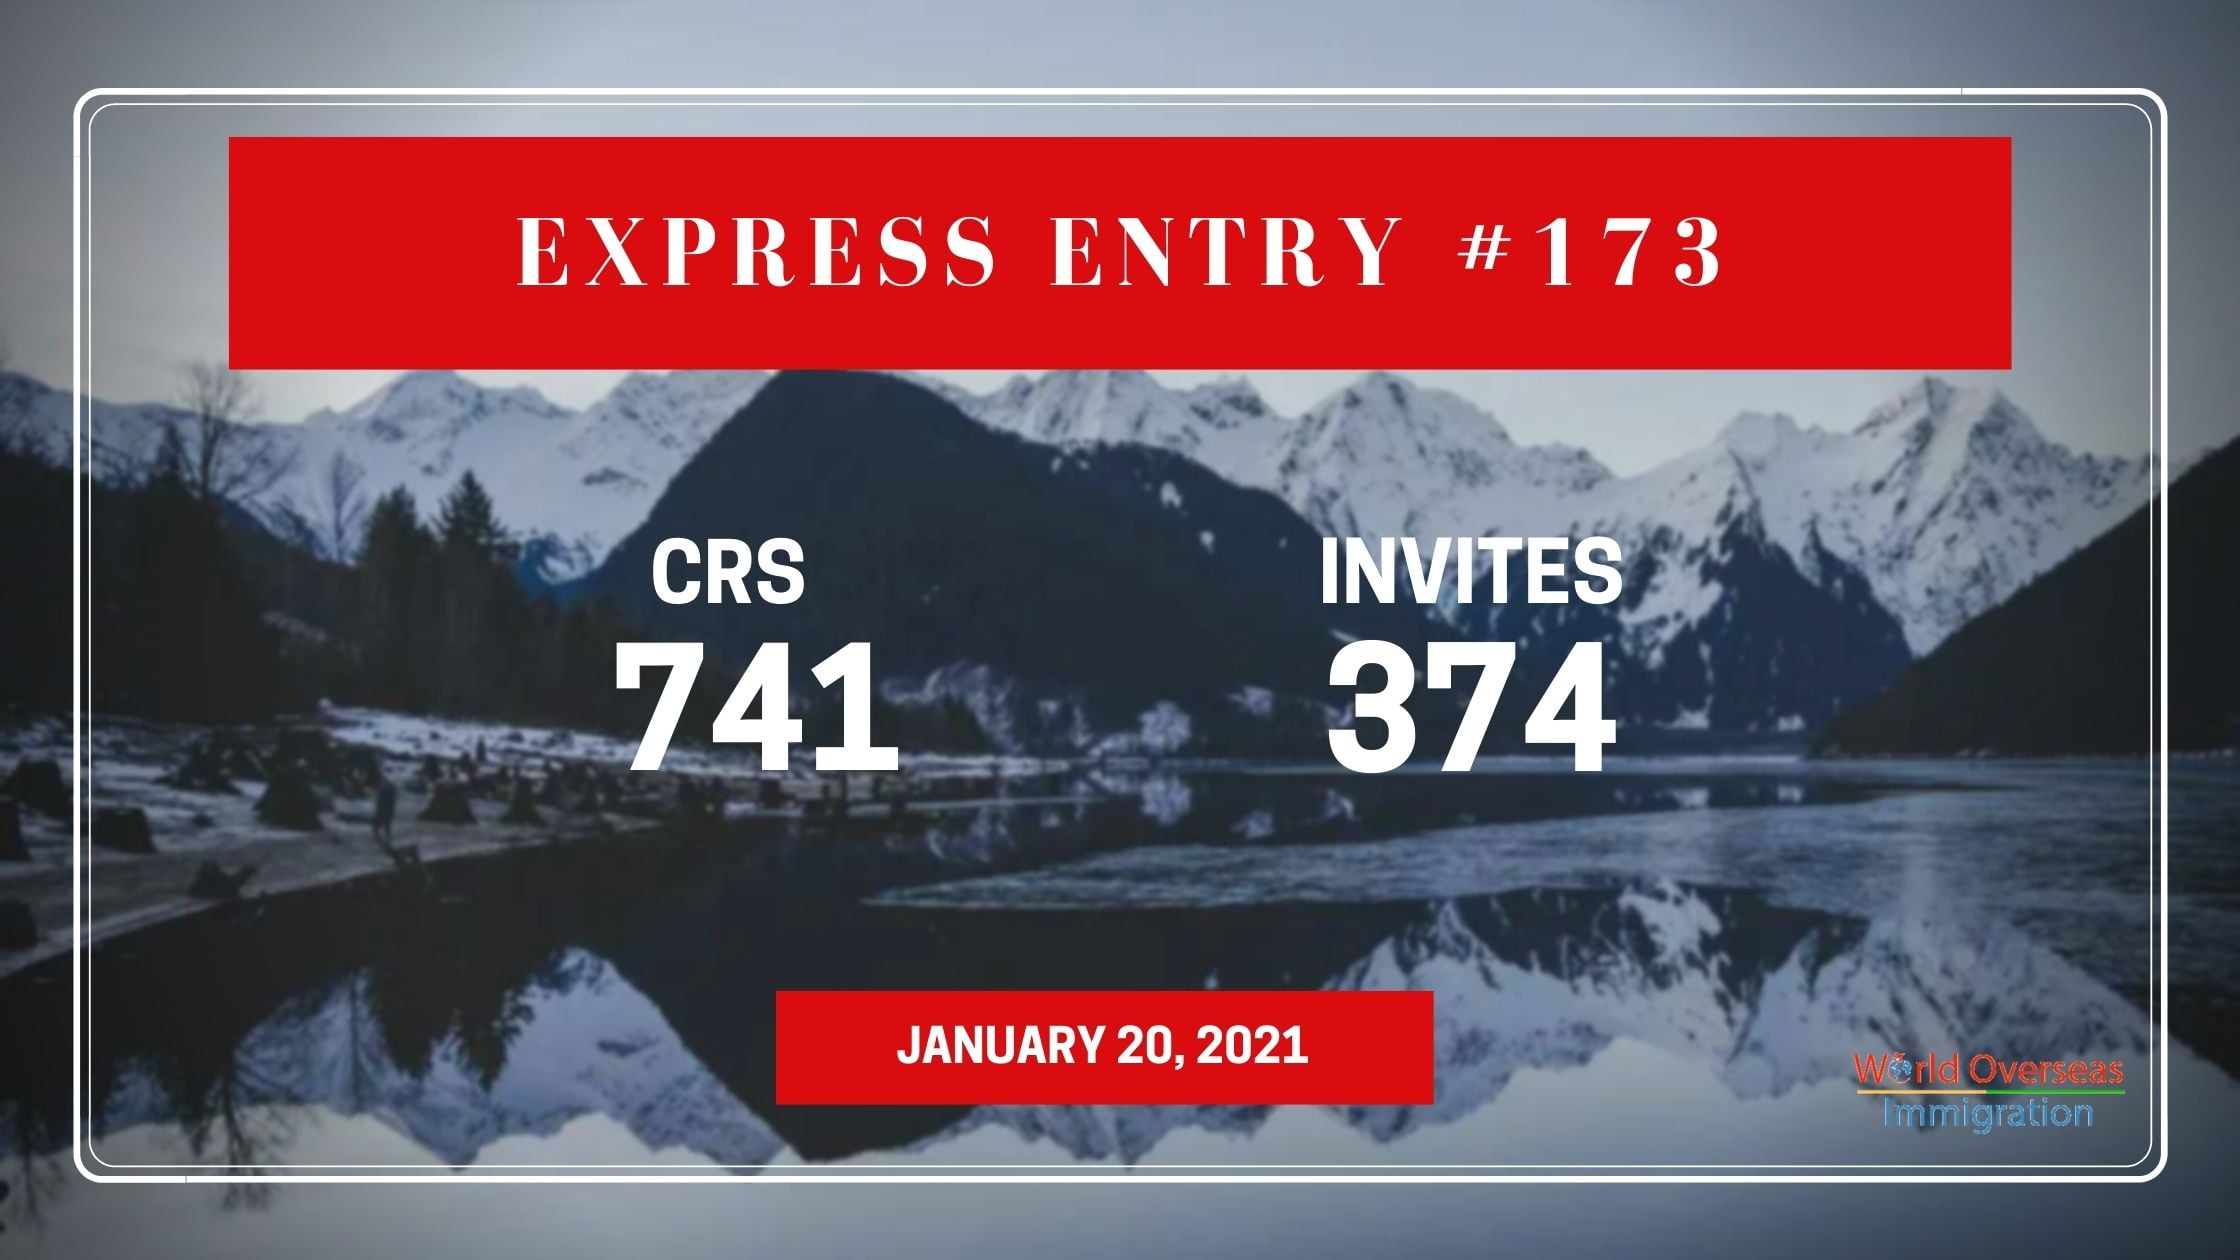 Express Entry #173: 374 ITAs are issued in the new draw